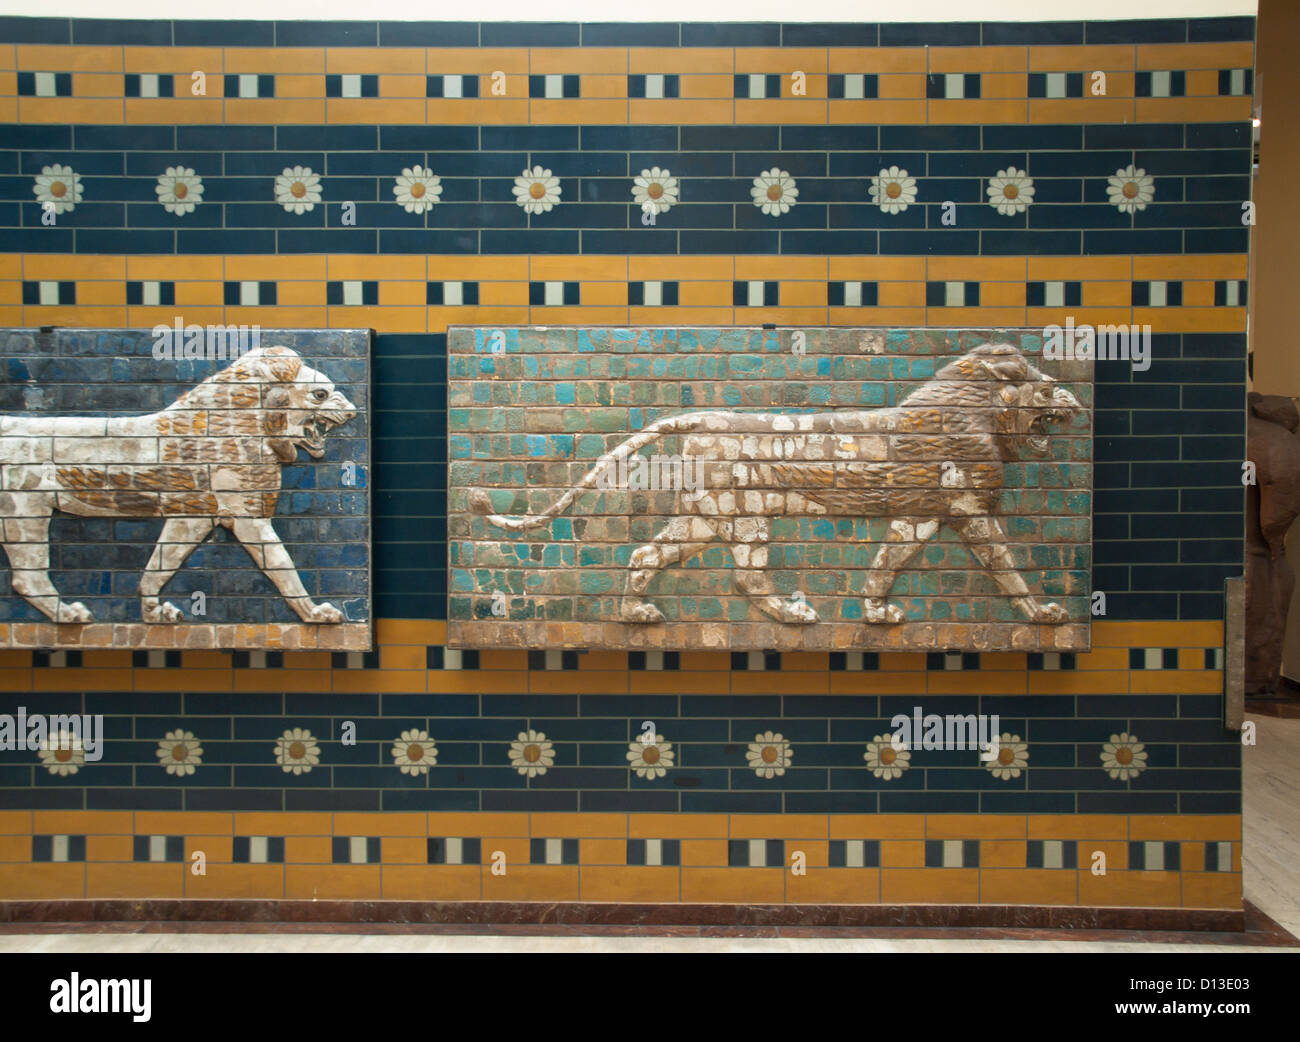 Istanbul Archaeology Museums, glazed tile images from the procession street and Ishtar Gate of Babylon Stock Photo